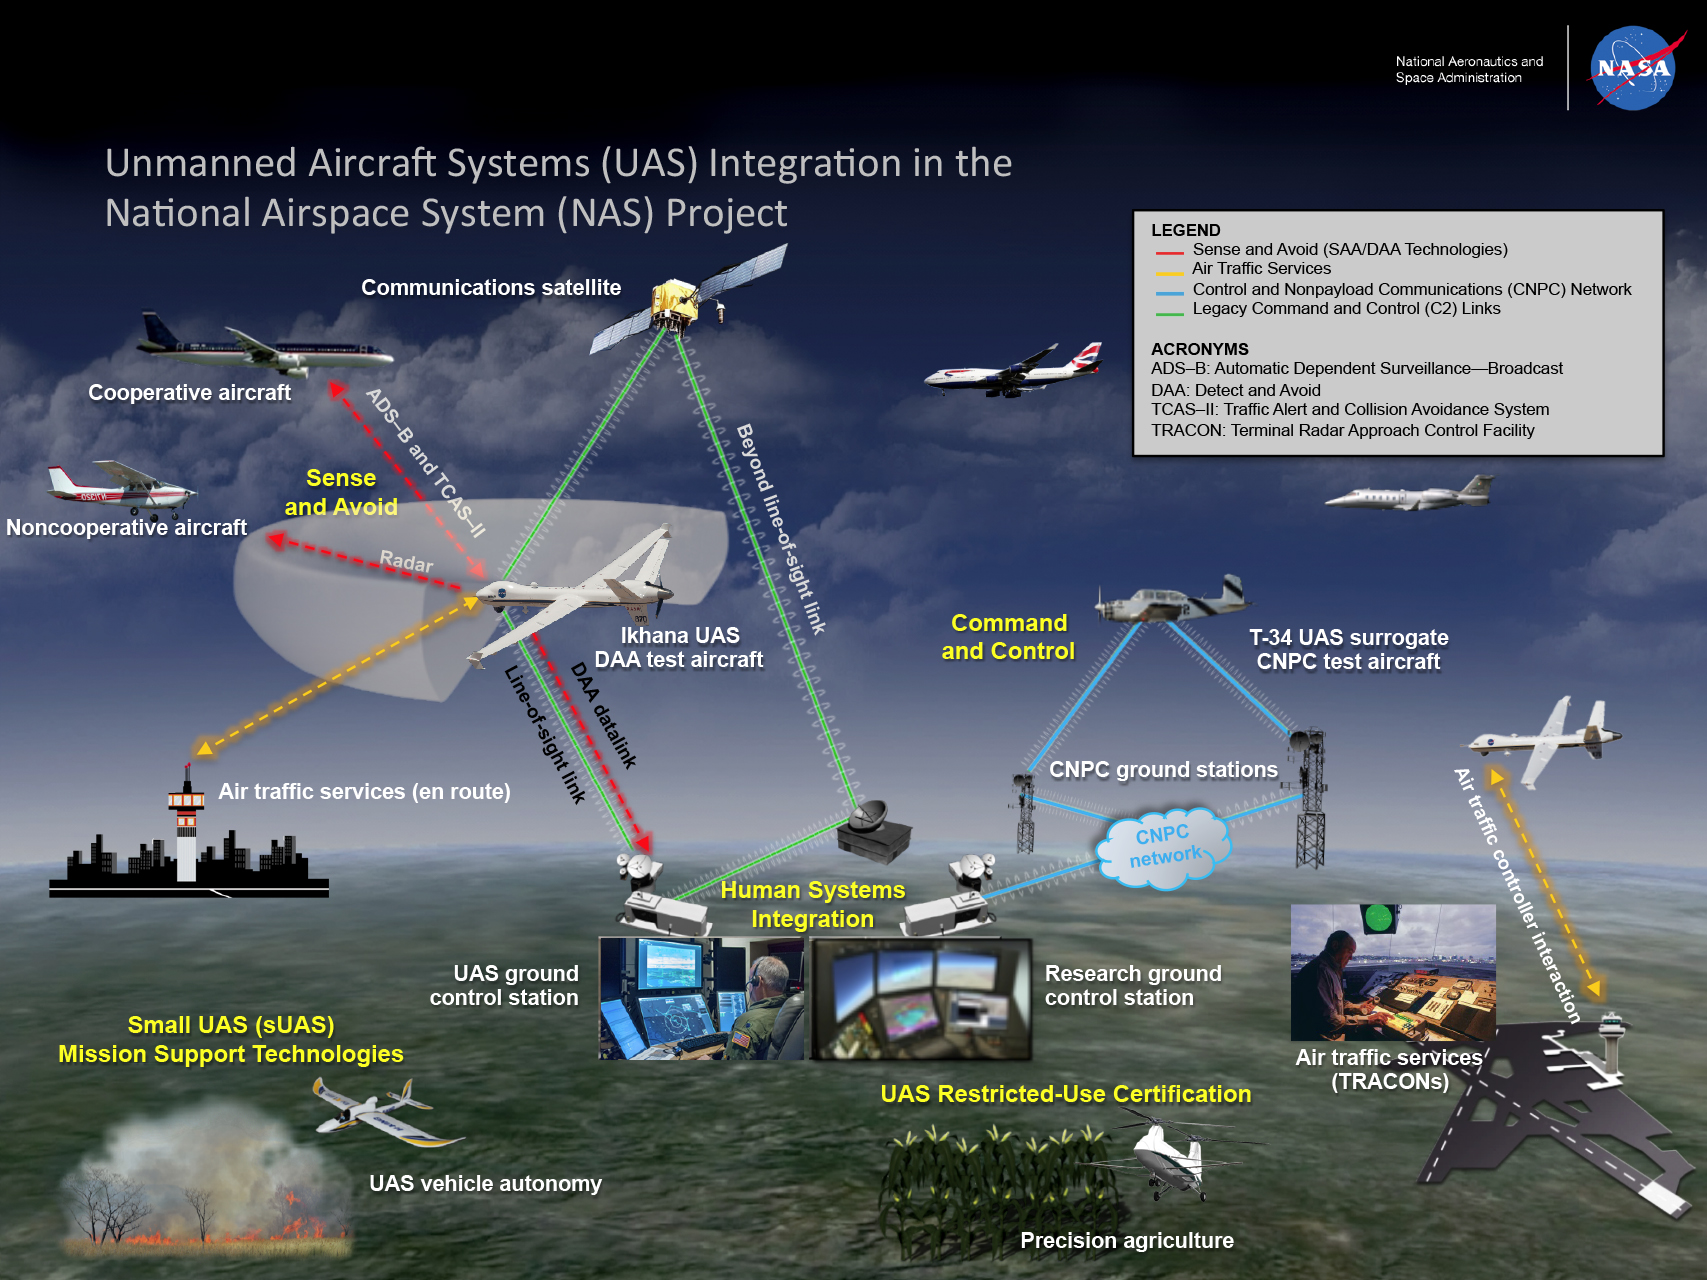 Graphic displaying the Unmanned Aircraft Systems (UAS) Integration in the National Airspace Systems (NAS) Project